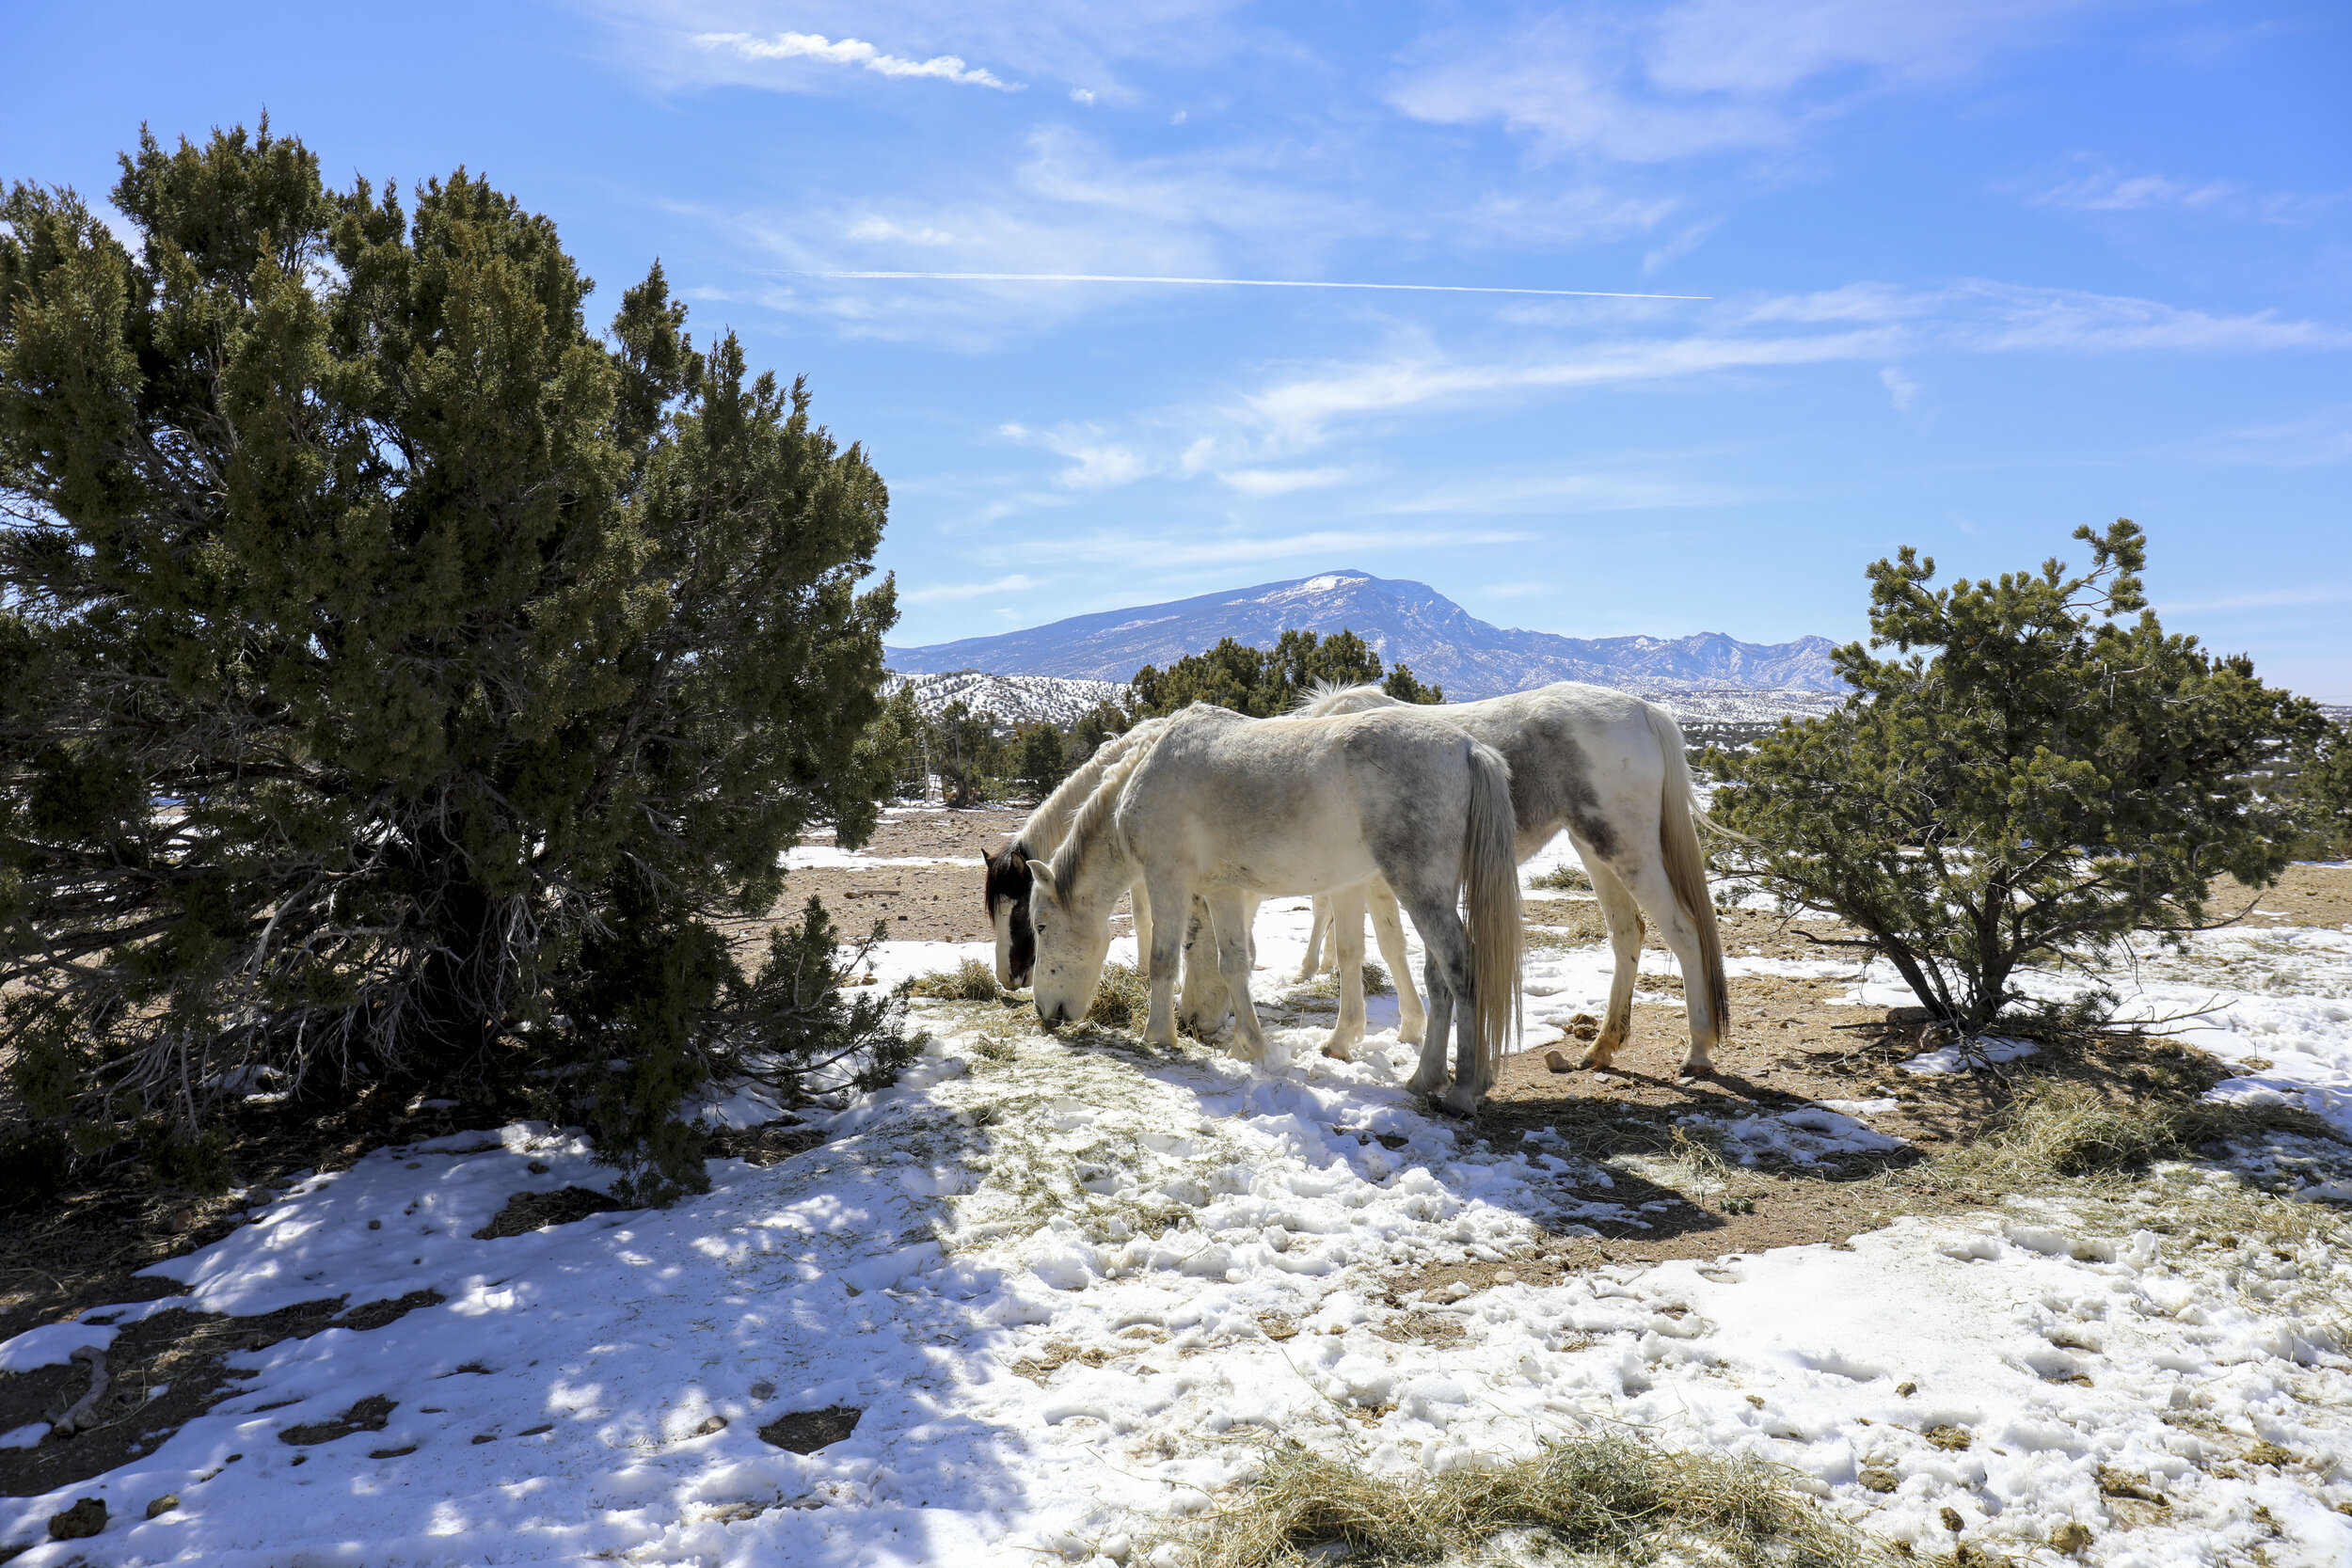  Horses graze on hay brought by Placitas Wild to the preserve on Feb. 24, 2019.  